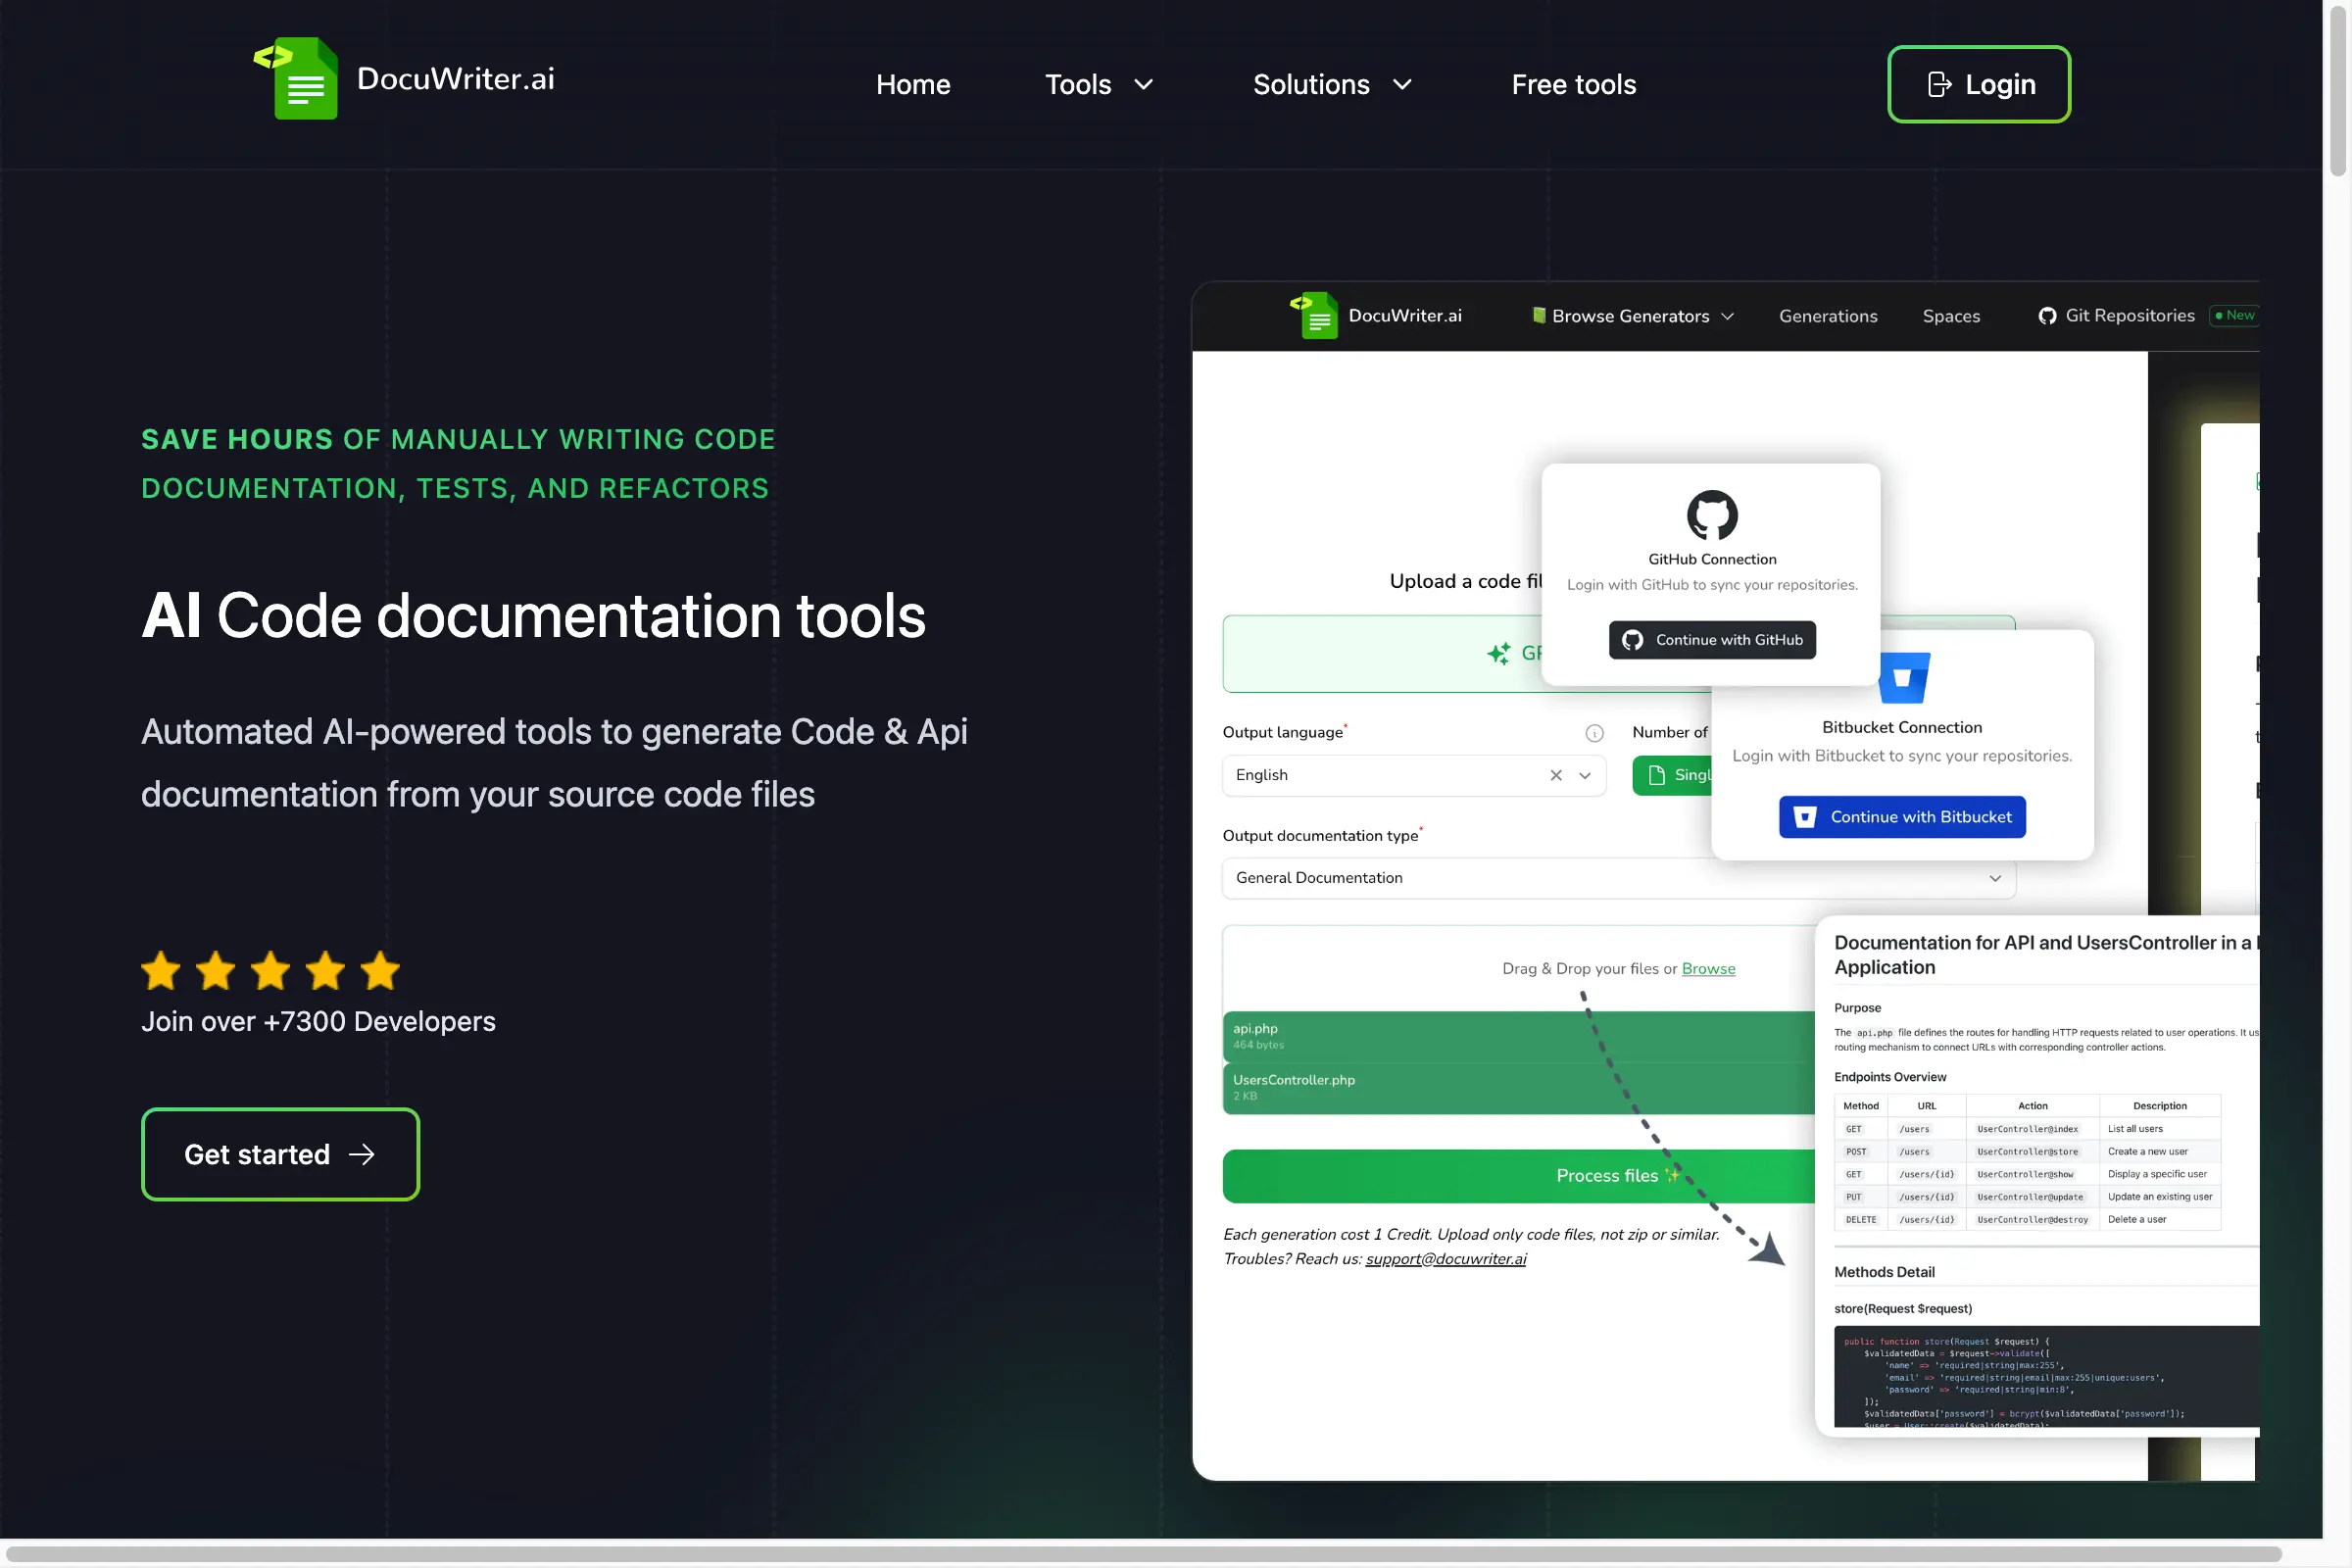 DocuWriter.ai: AI Code documentation, Testing and Refactor